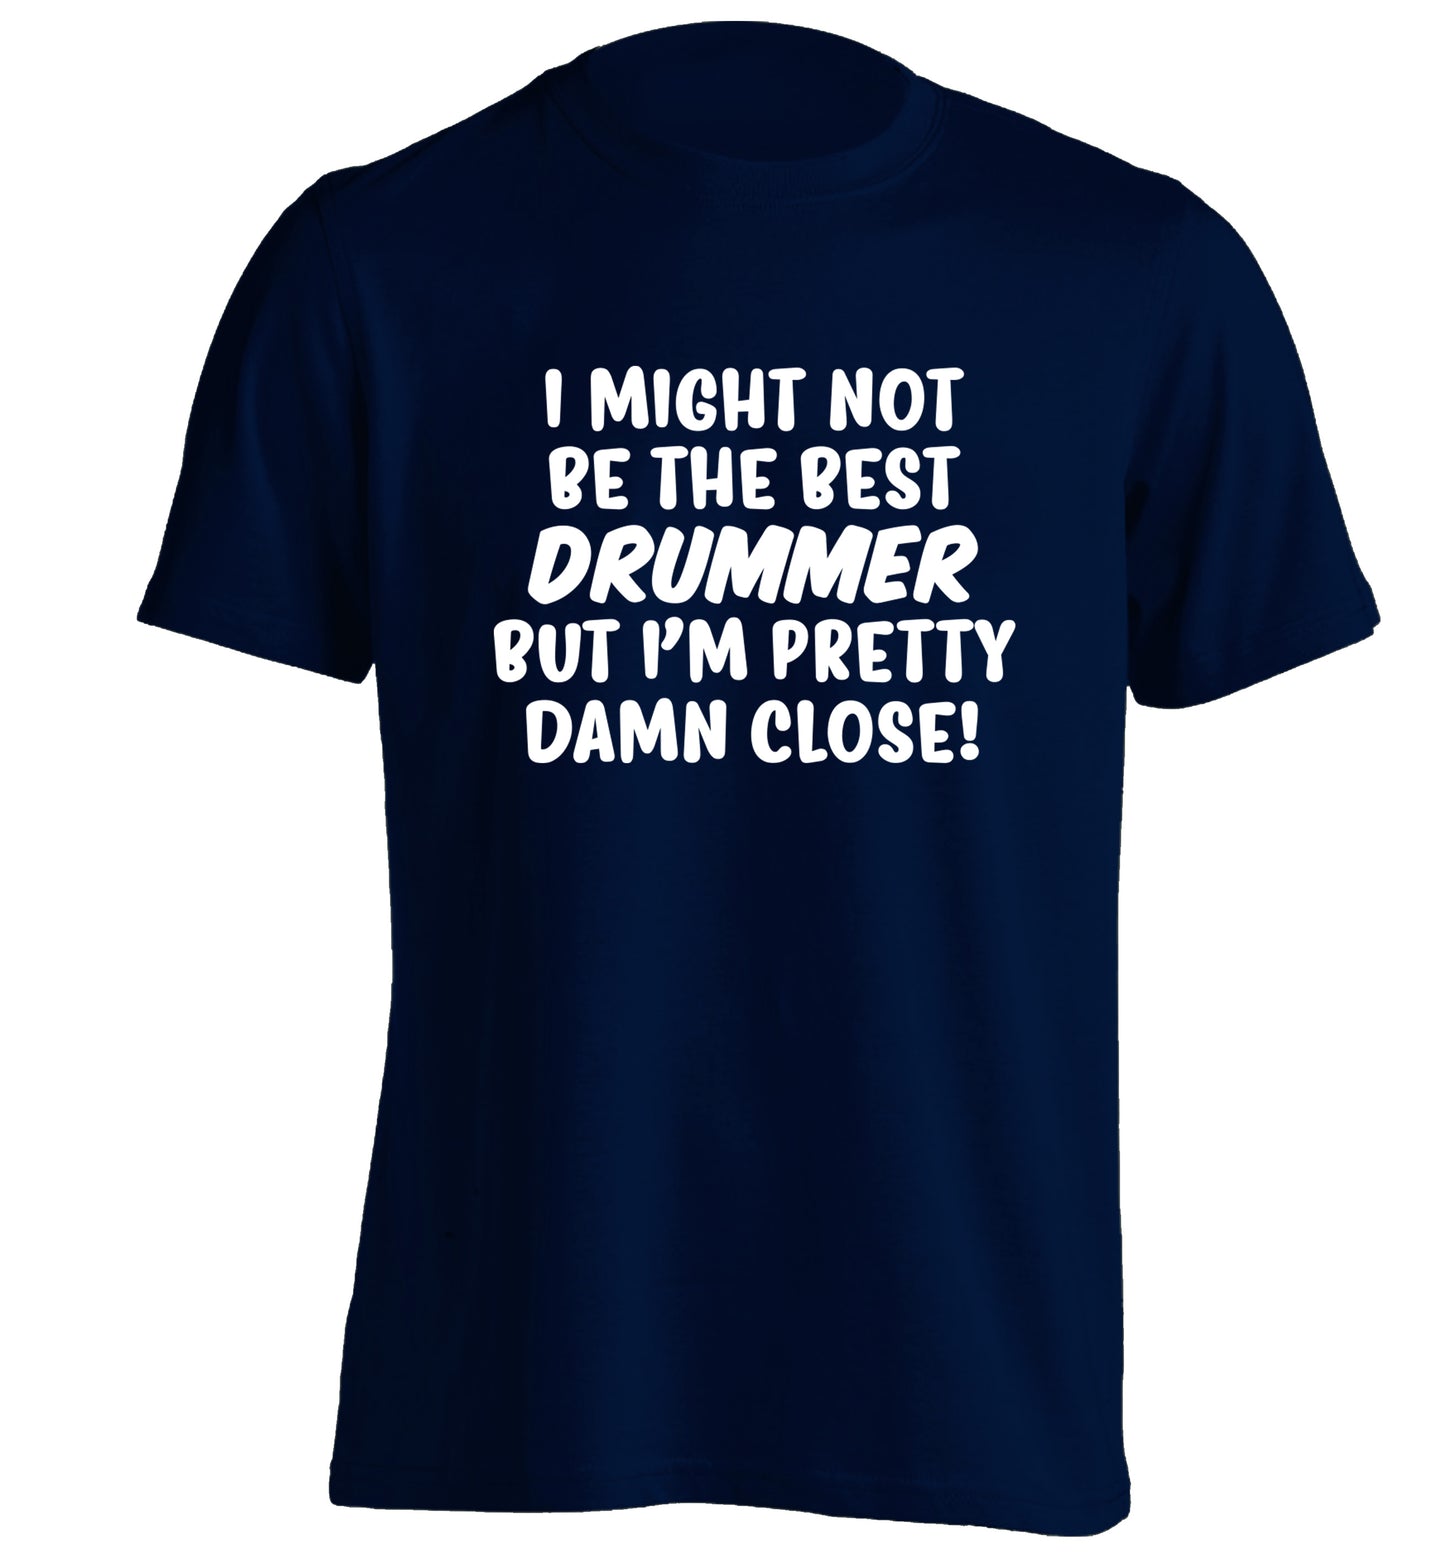 I might not be the best drummer but I'm pretty close! adults unisexnavy Tshirt 2XL